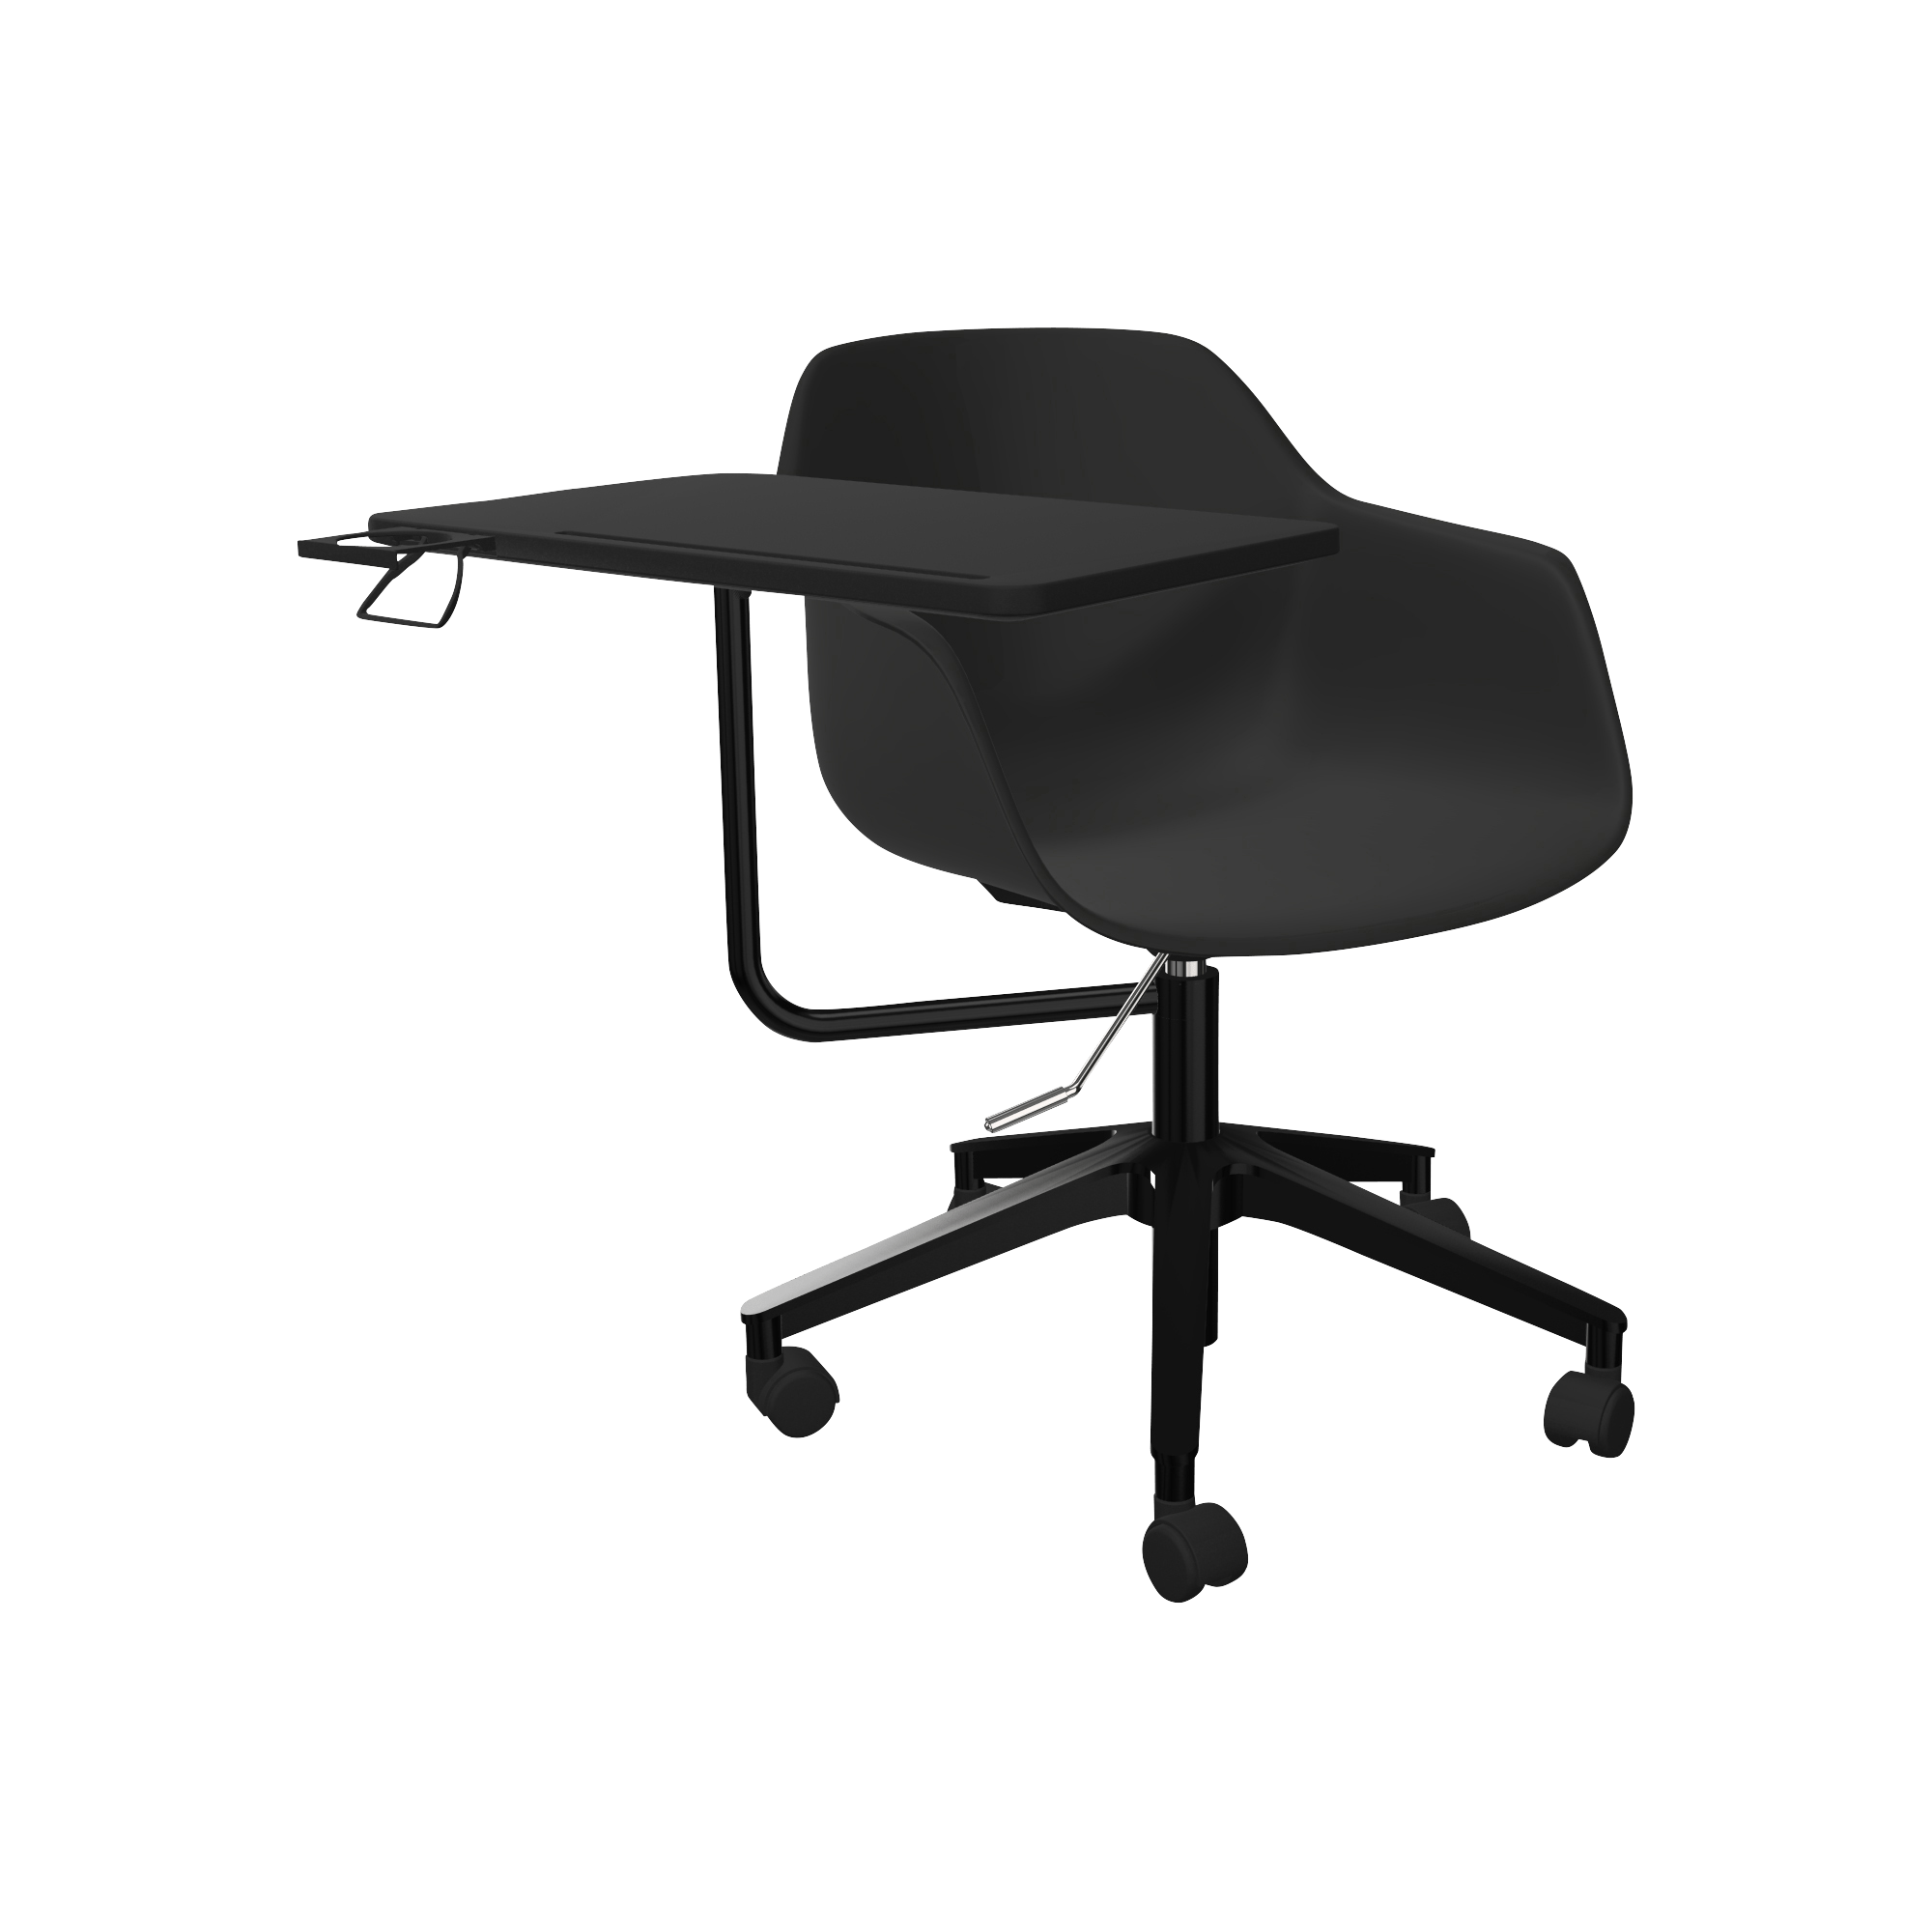 A black office chair with a table on it.